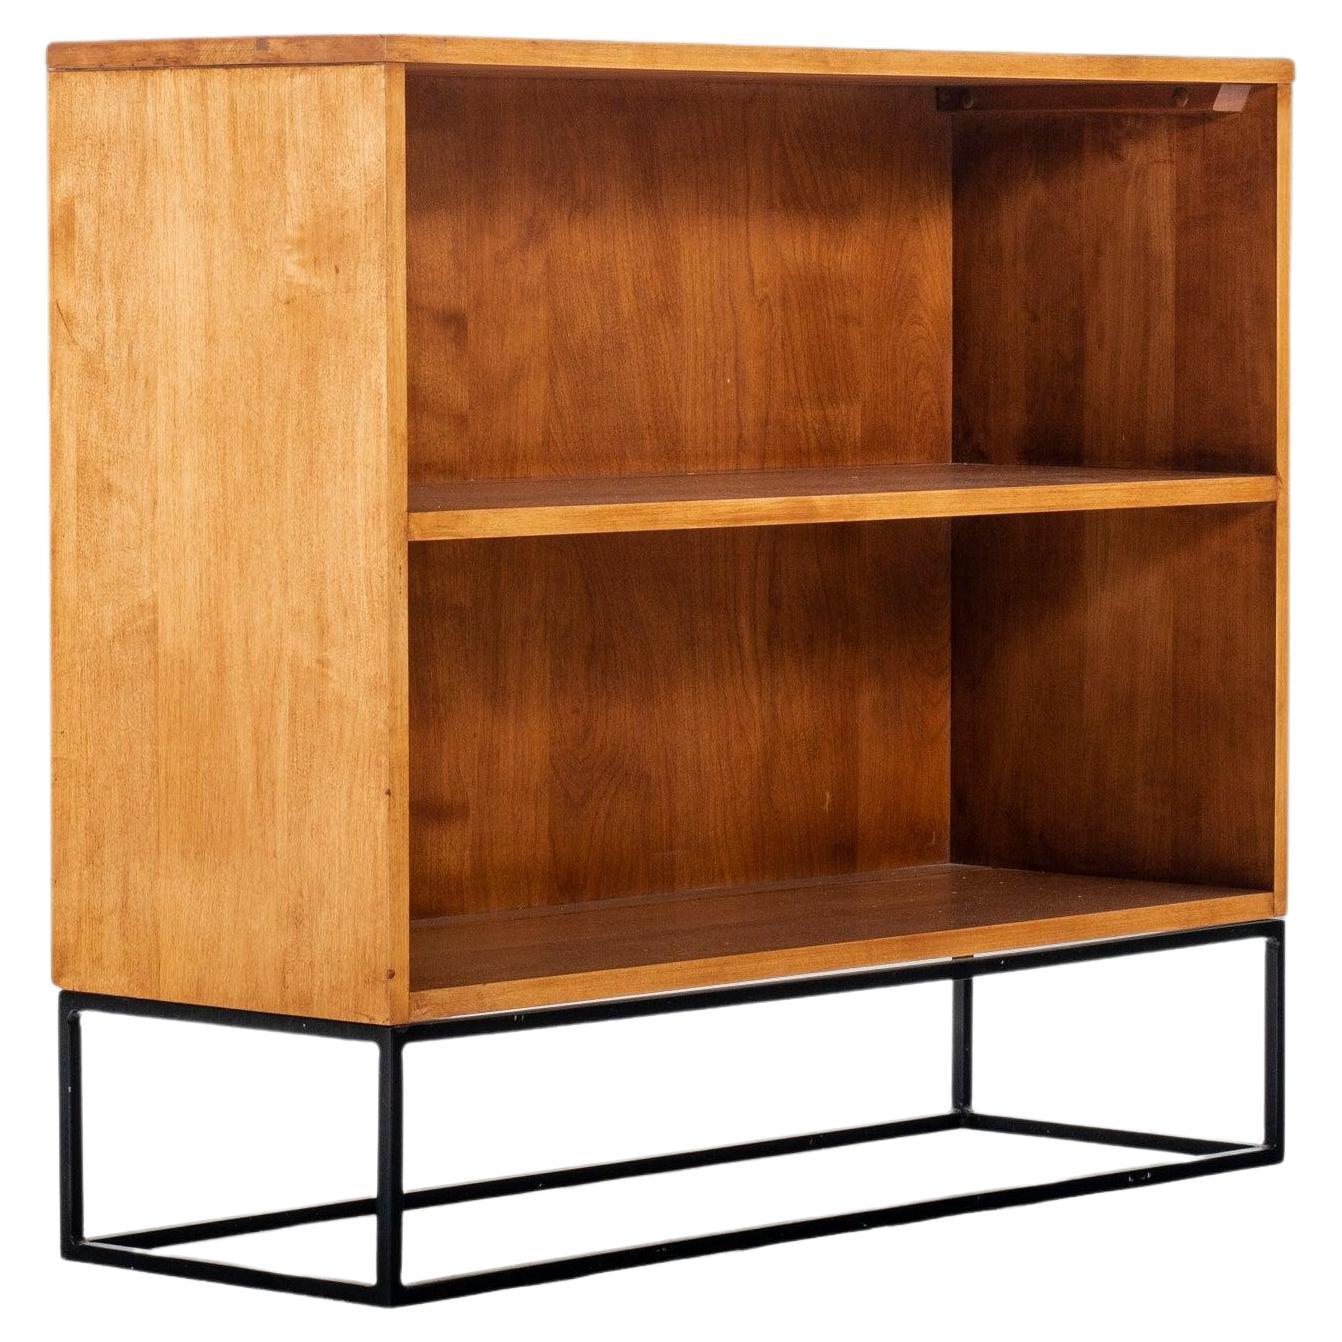 Bookcase / Entry Table by Paul McCobb for Winchendon Planner Group, USA, c. 1960